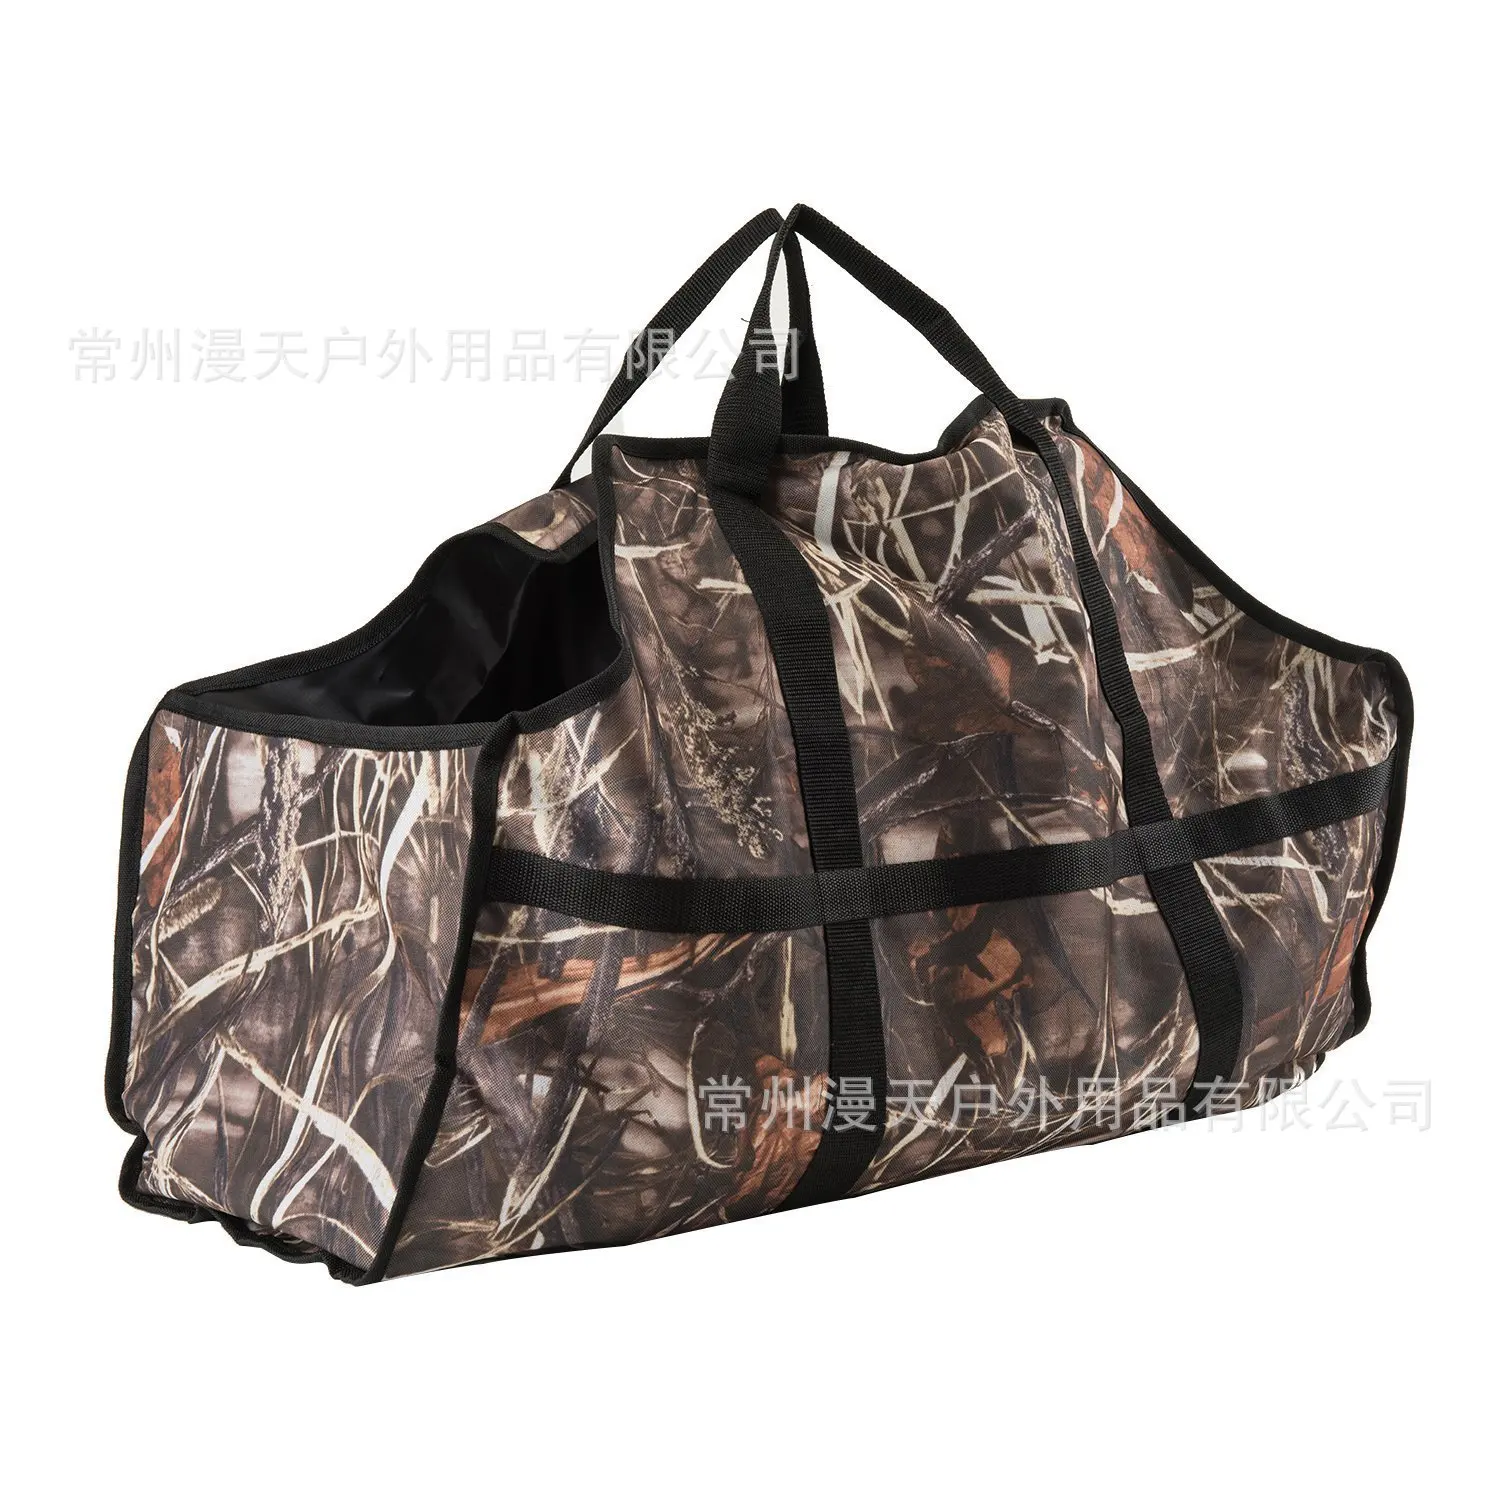 Manufacturers Supply of Goods Sky Outdoor Universal Automobile Storage Bag Trunk Debris Storage Car Mounted Chair Zhiwu Dai